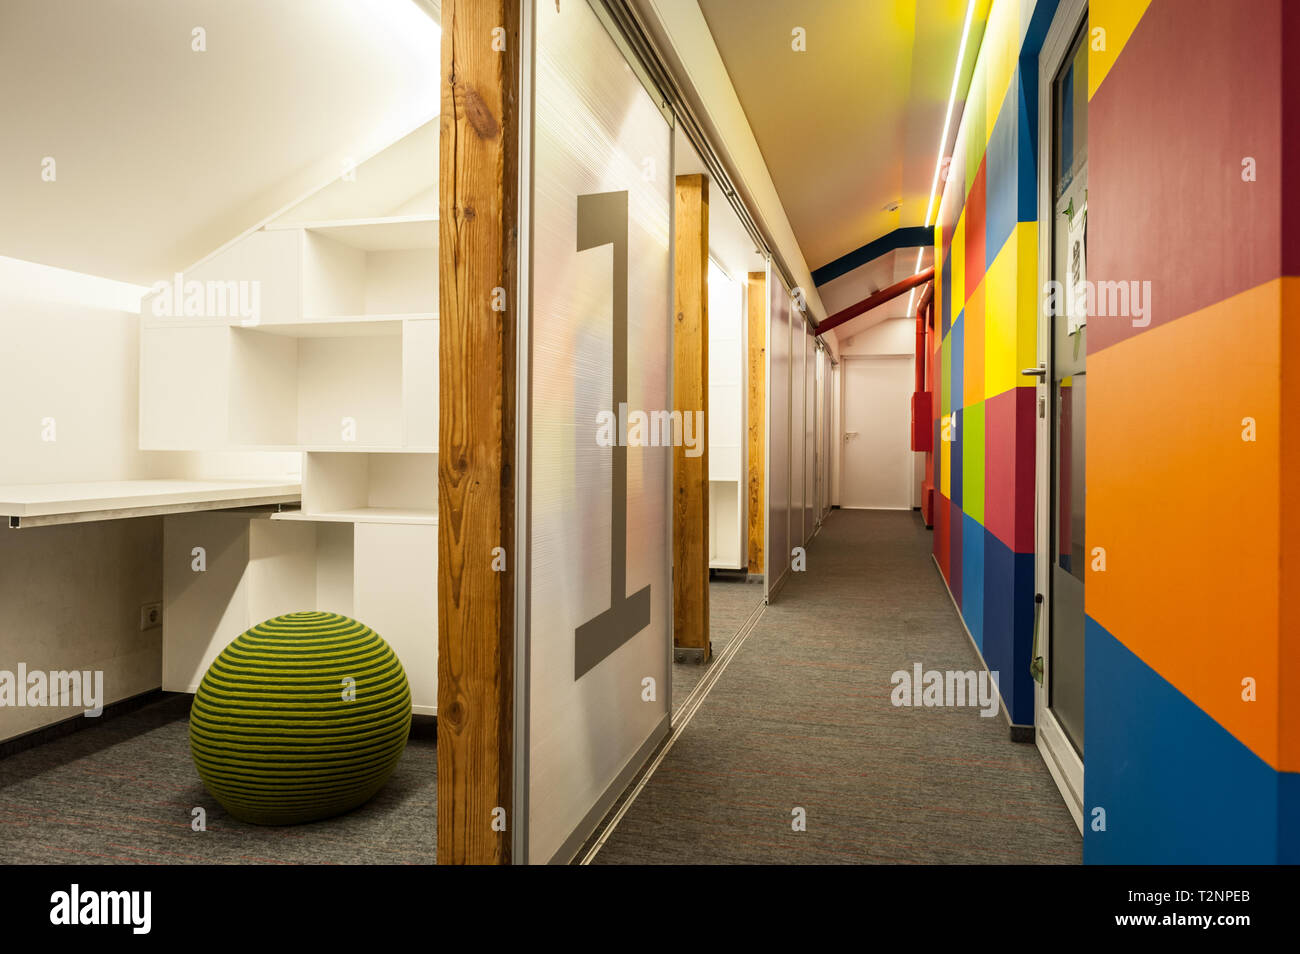 Bright colourful and minimal interior design in a business and education environment. Stock Photo